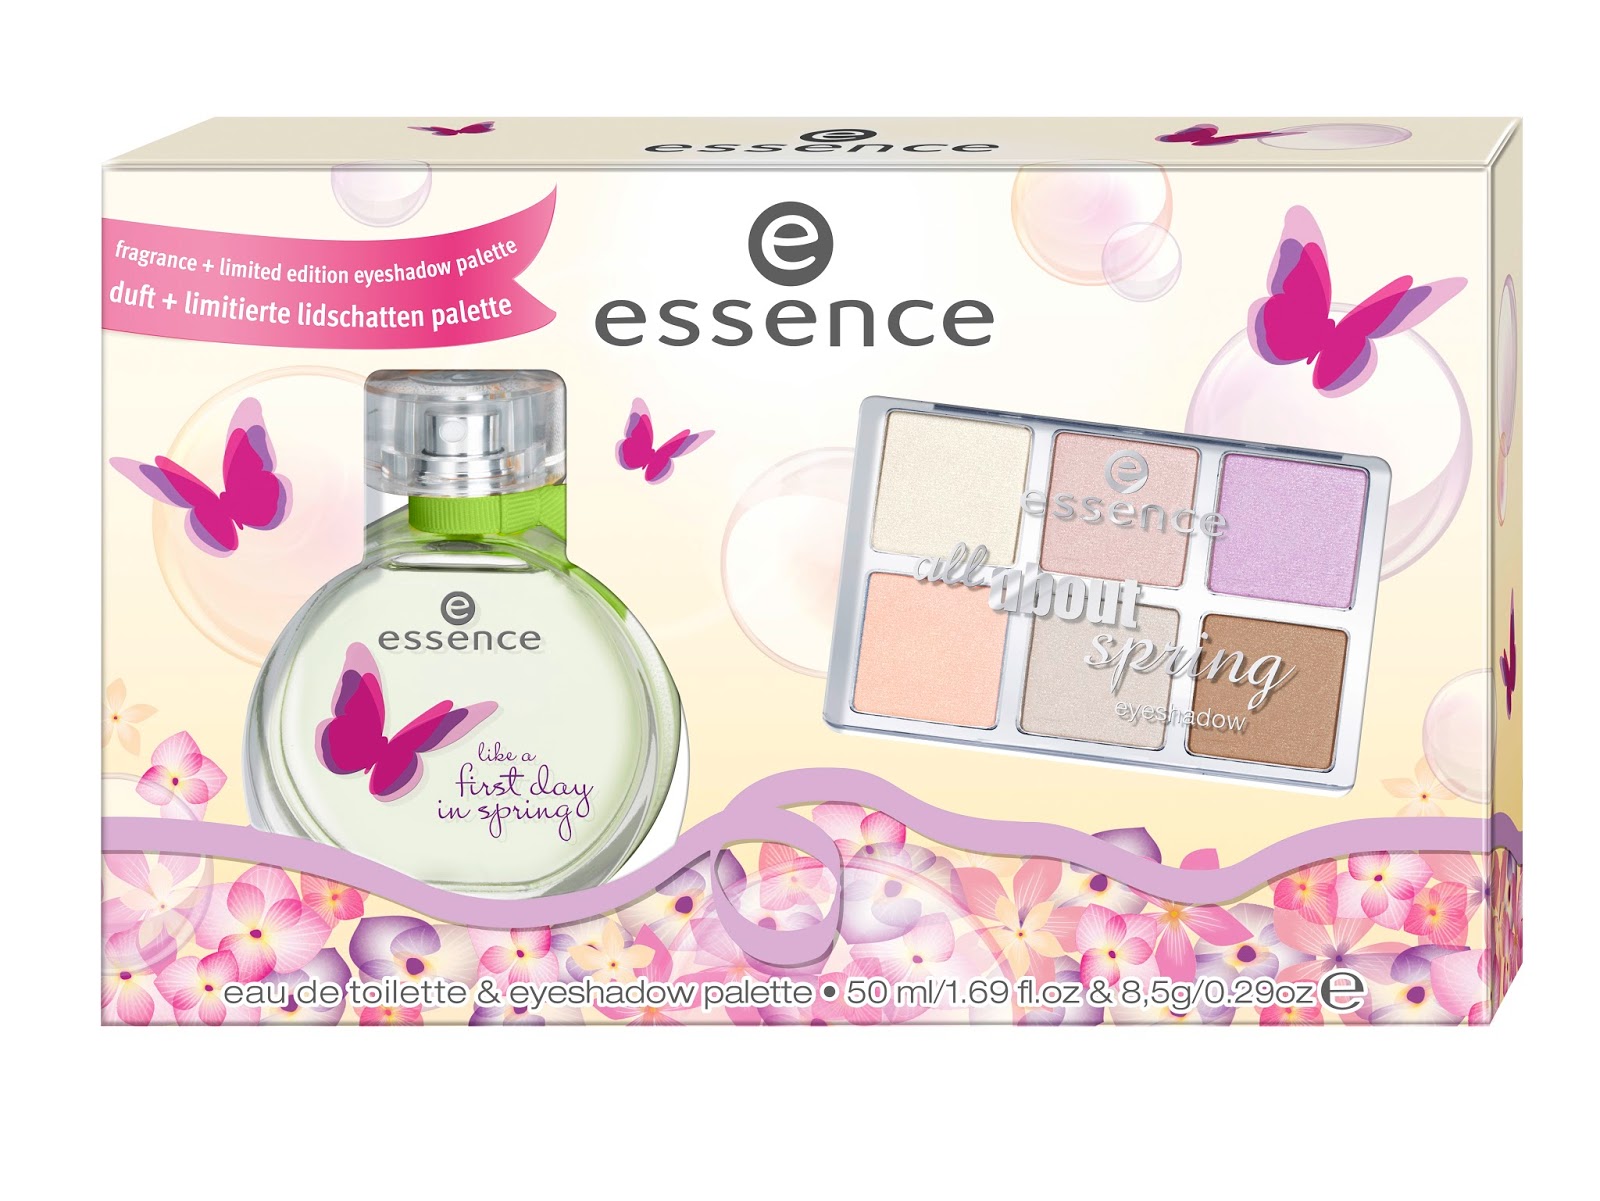 essence spring set – like a first day in spring